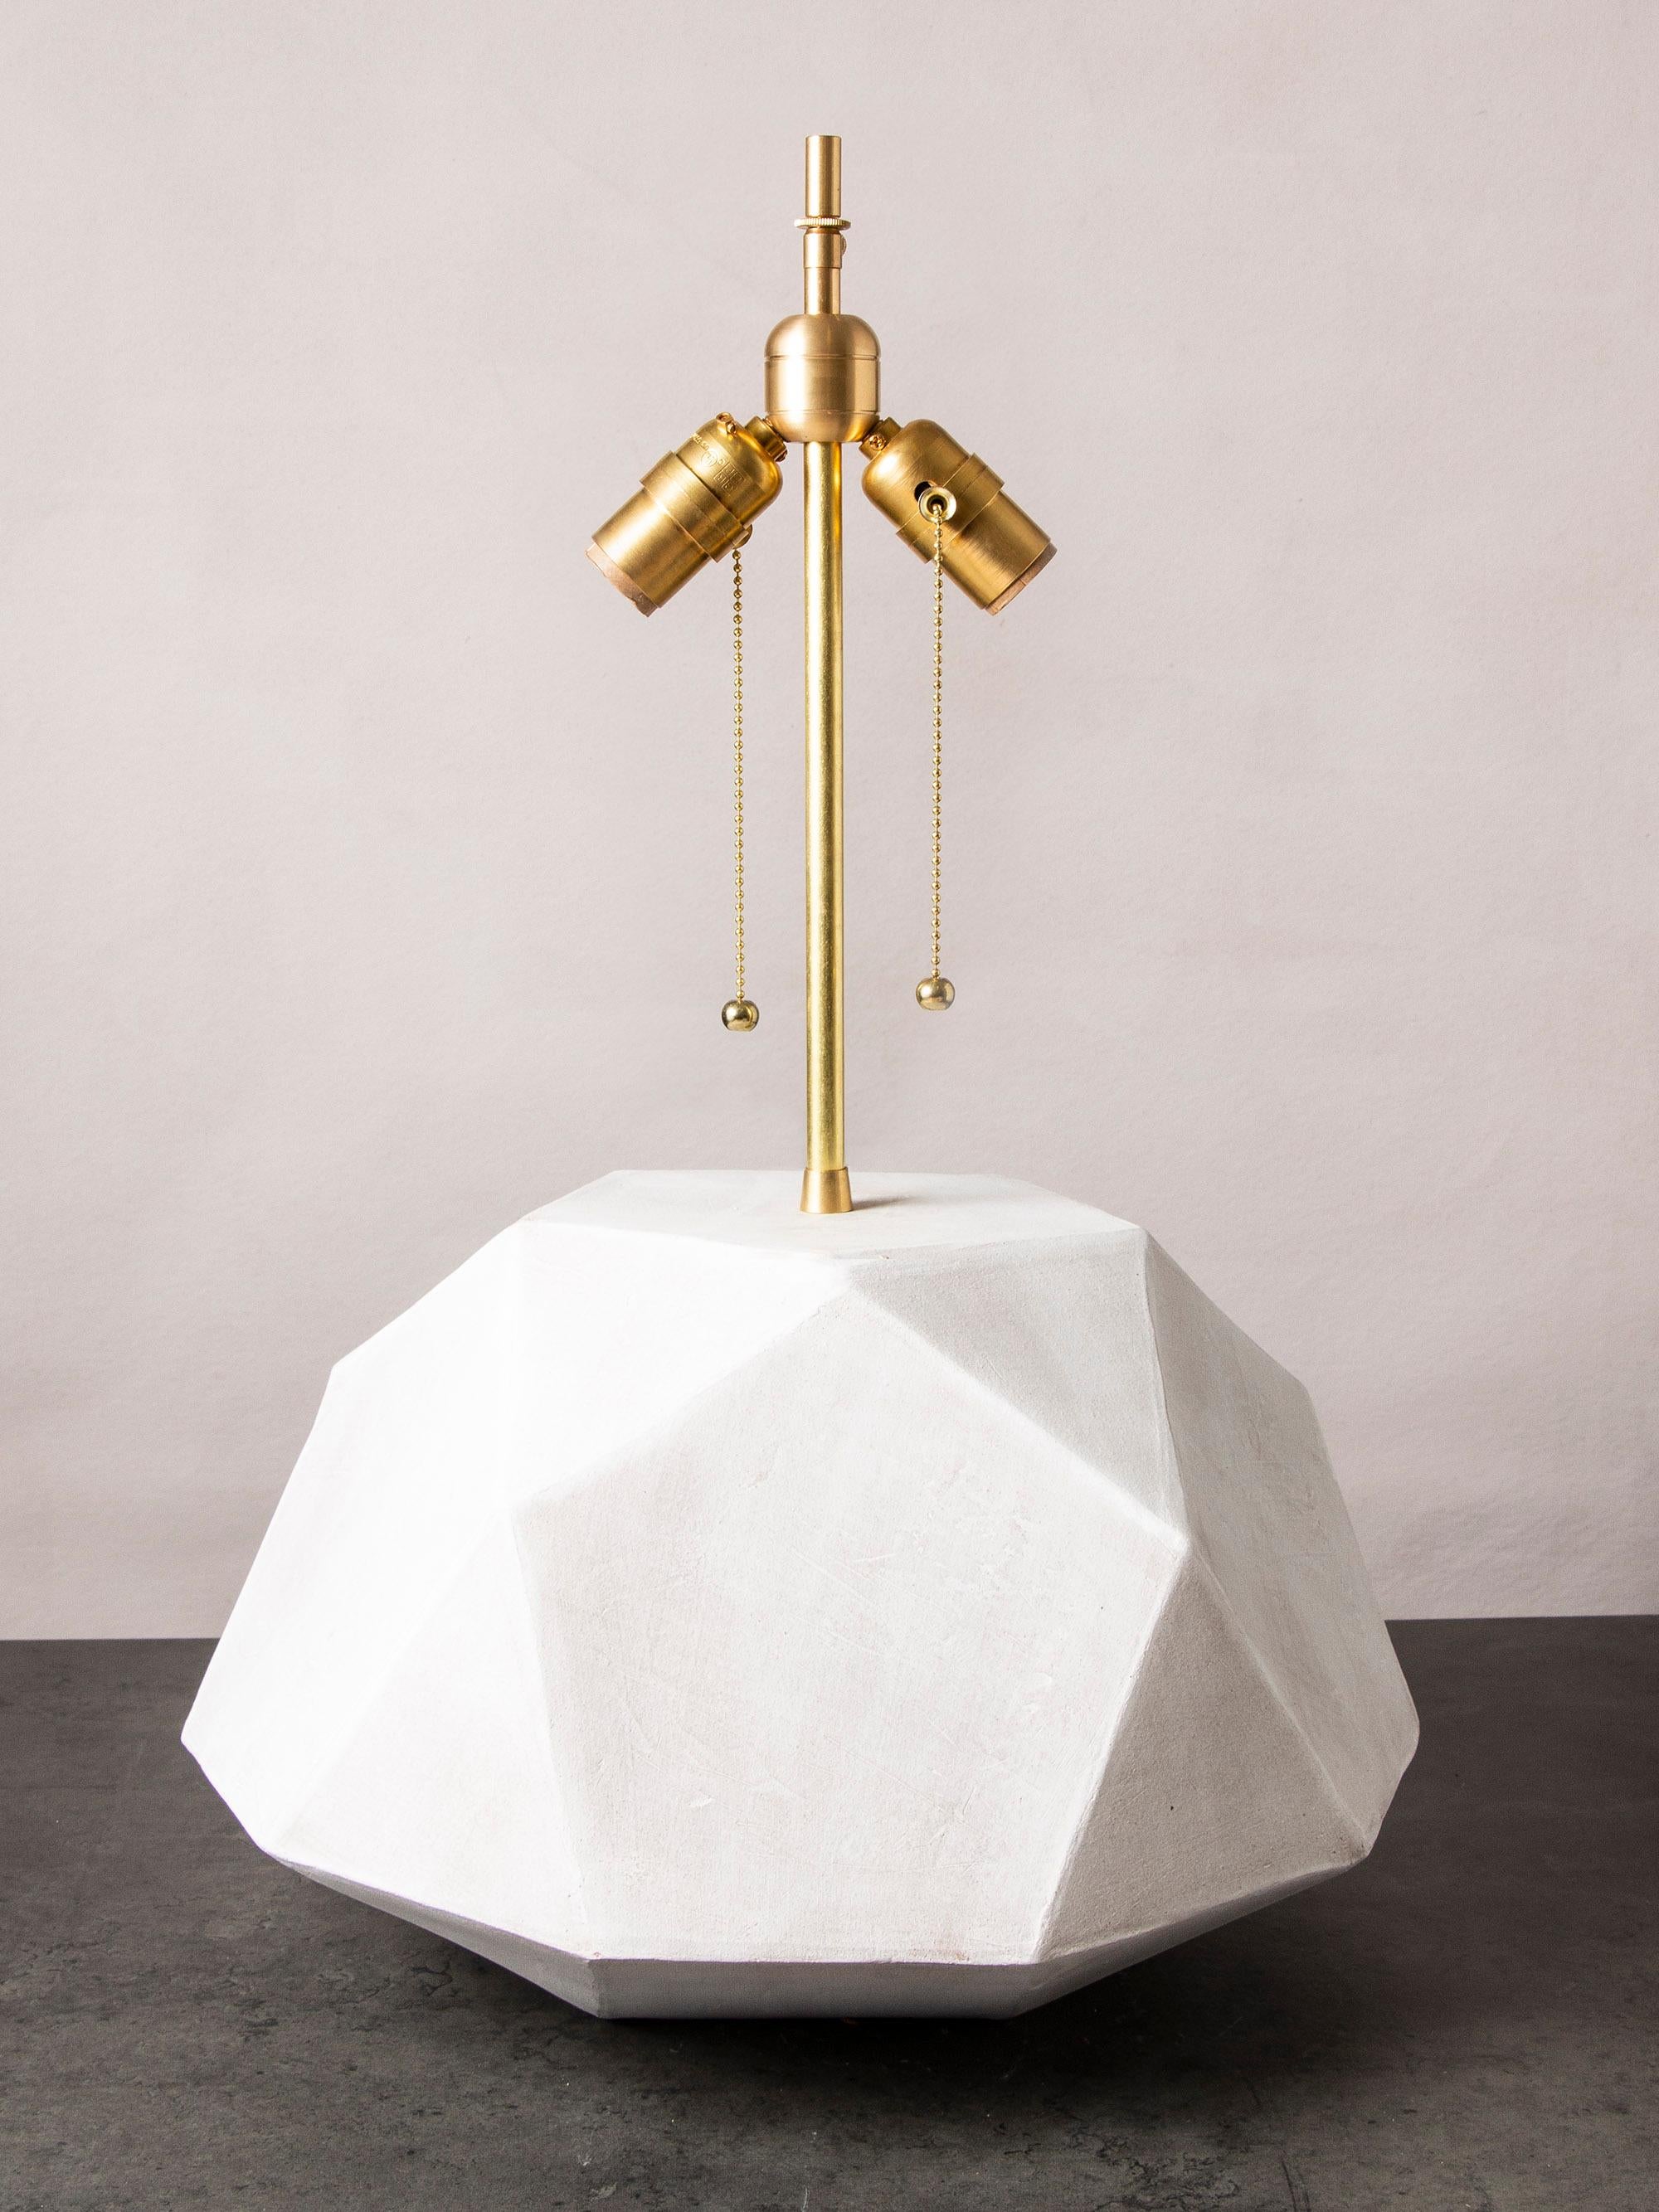 Modern Geode Lamp 1 - Geometric White Ceramic and Brass Table Lamp #1 For Sale